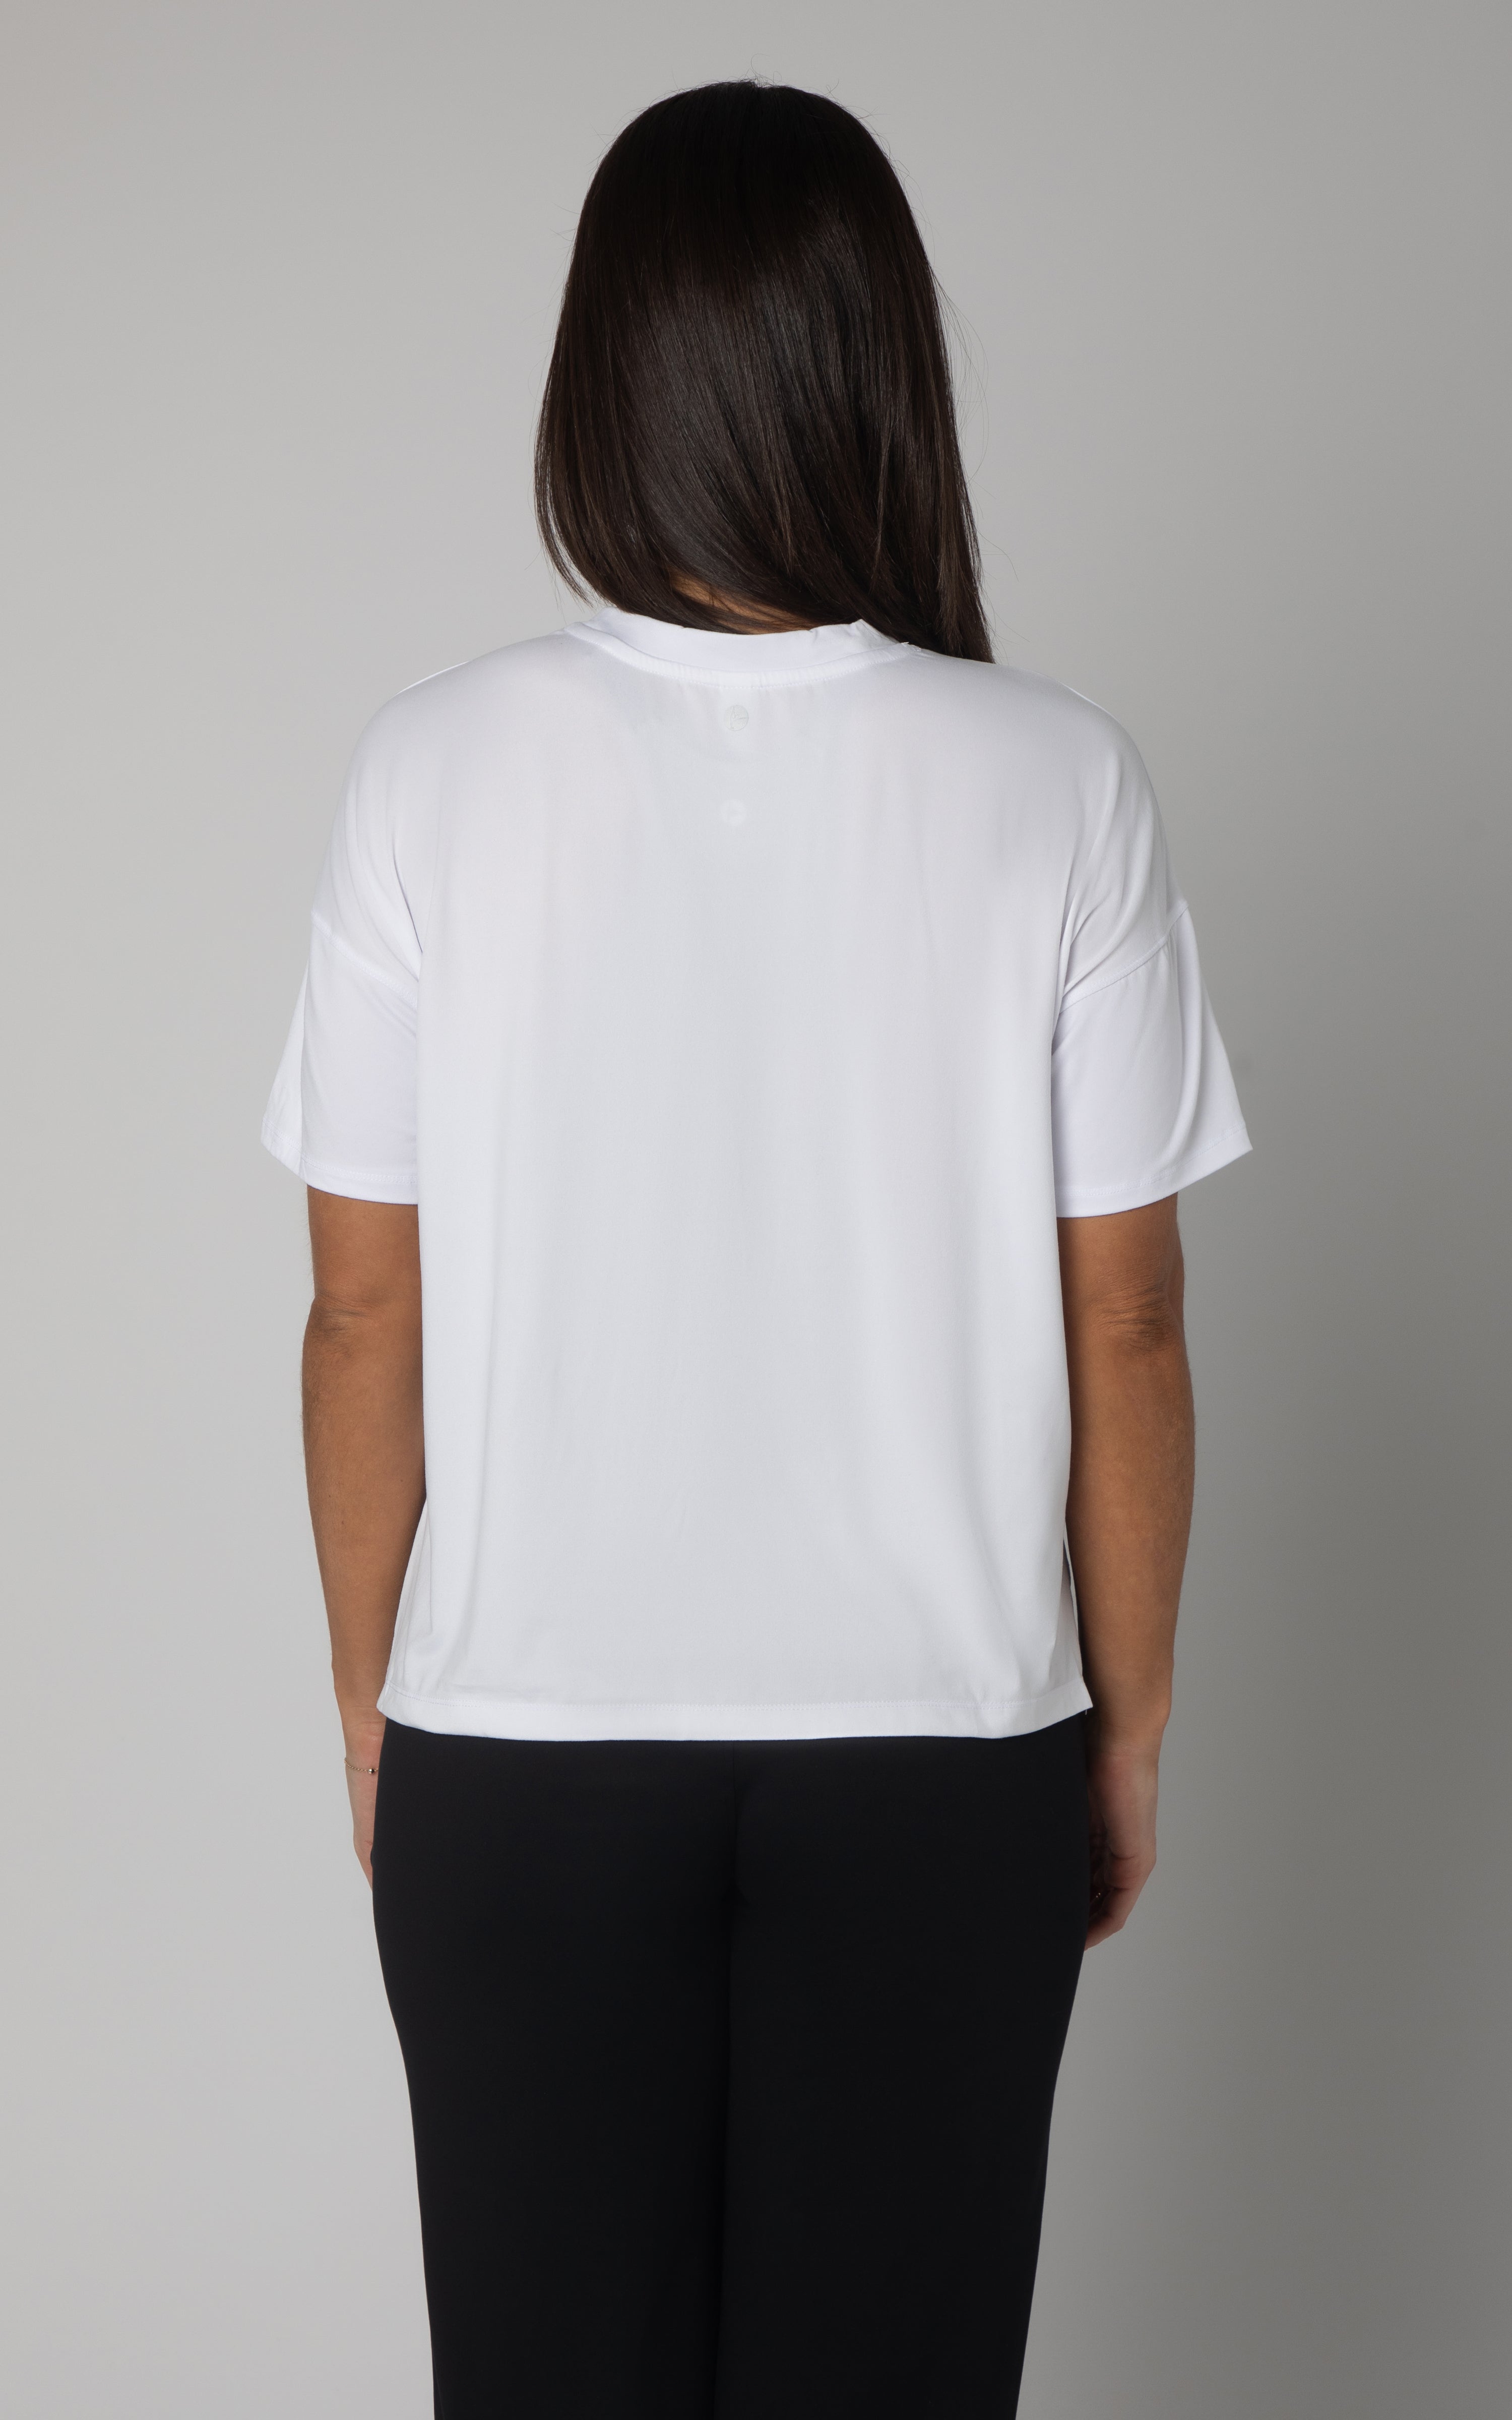 2 Pack High Low Super Soft Cropped Short Sleeve Tee